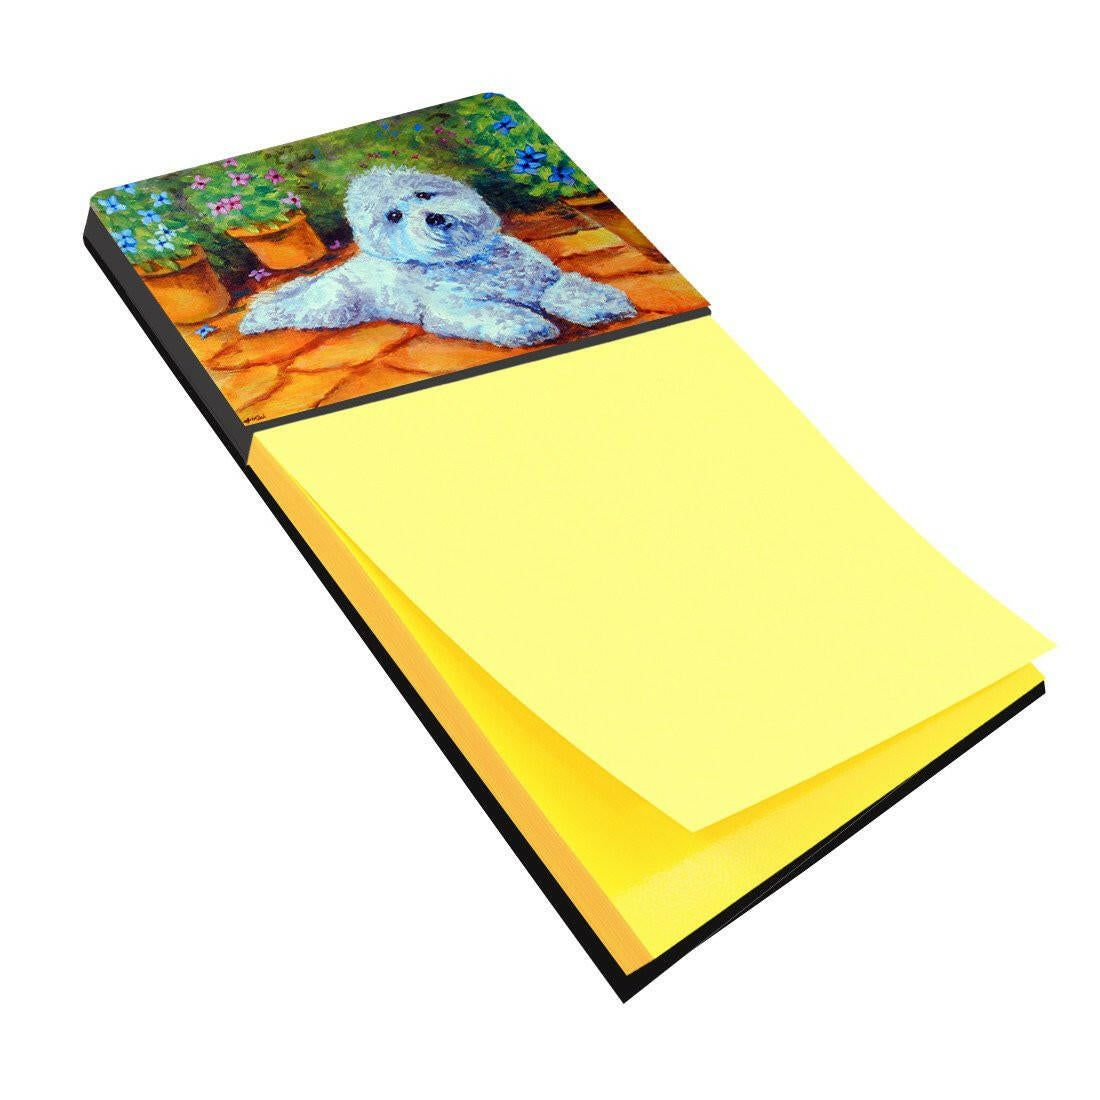 Bichon Frise on the patio Sticky Note Holder 7346SN by Caroline's Treasures